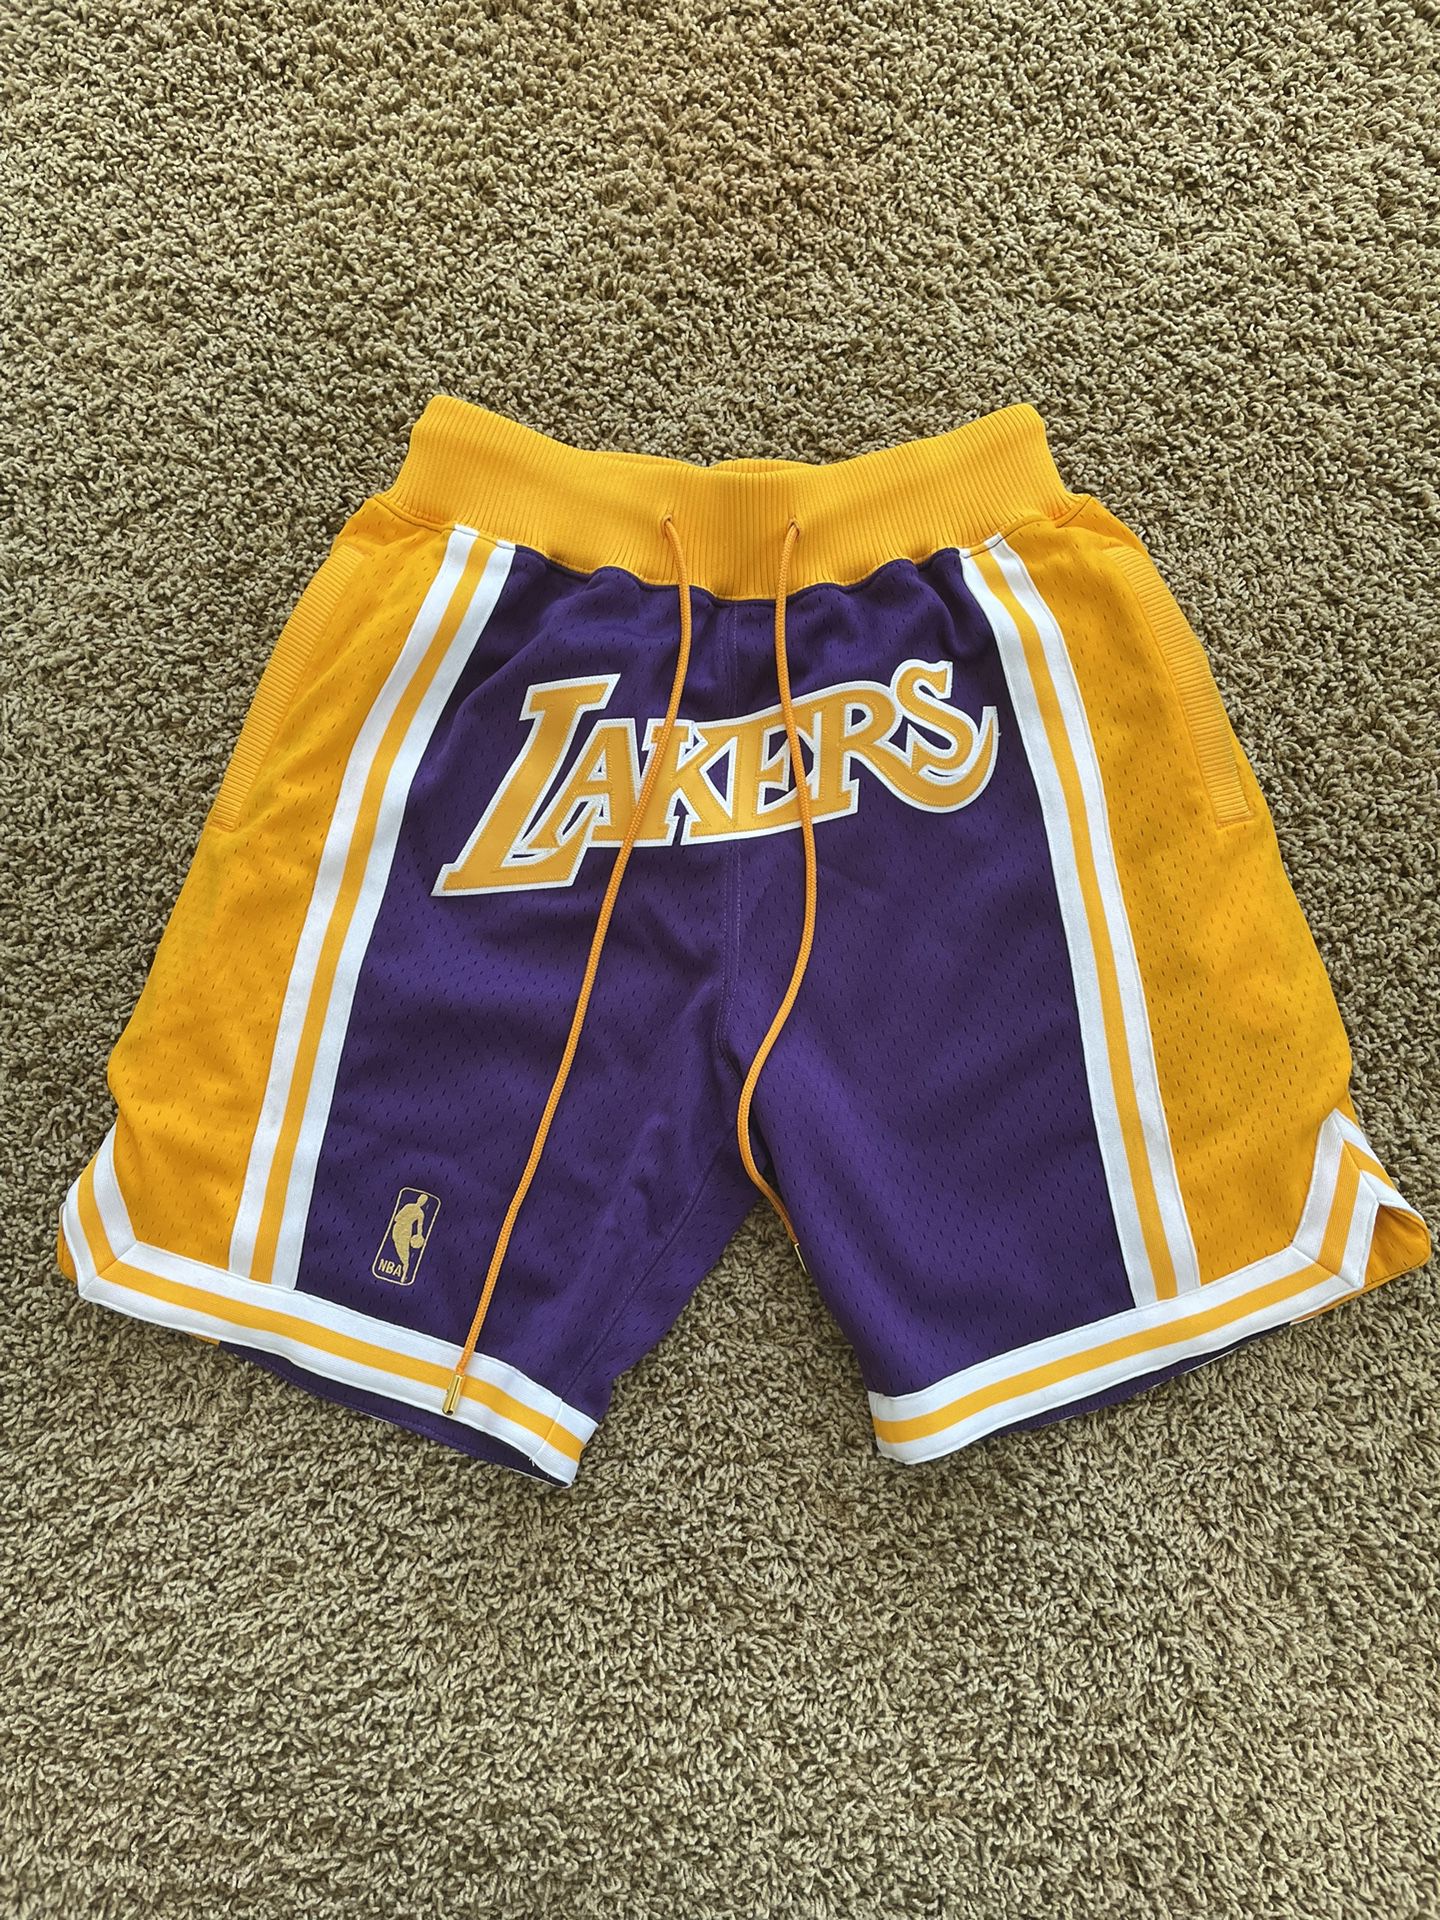 Lakers Just Don Shorts for Sale in Riverside, CA - OfferUp